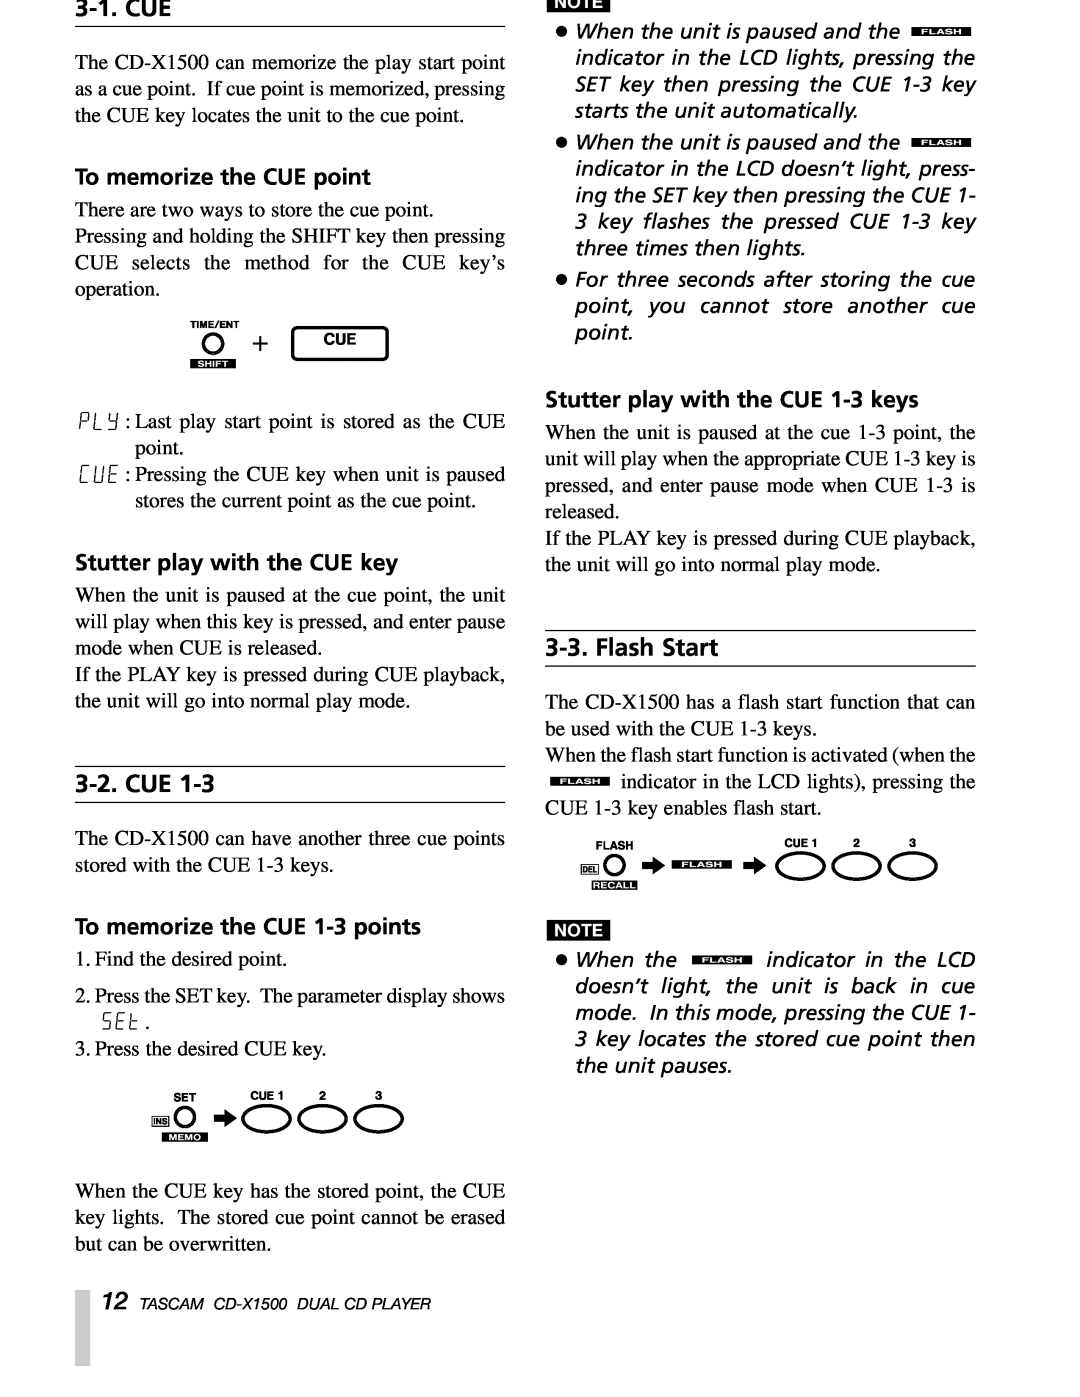 Sony CD-X1500 owner manual 3-1.CUE, 3-2.CUE, Flash Start, To memorize the CUE point, Stutter play with the CUE key 